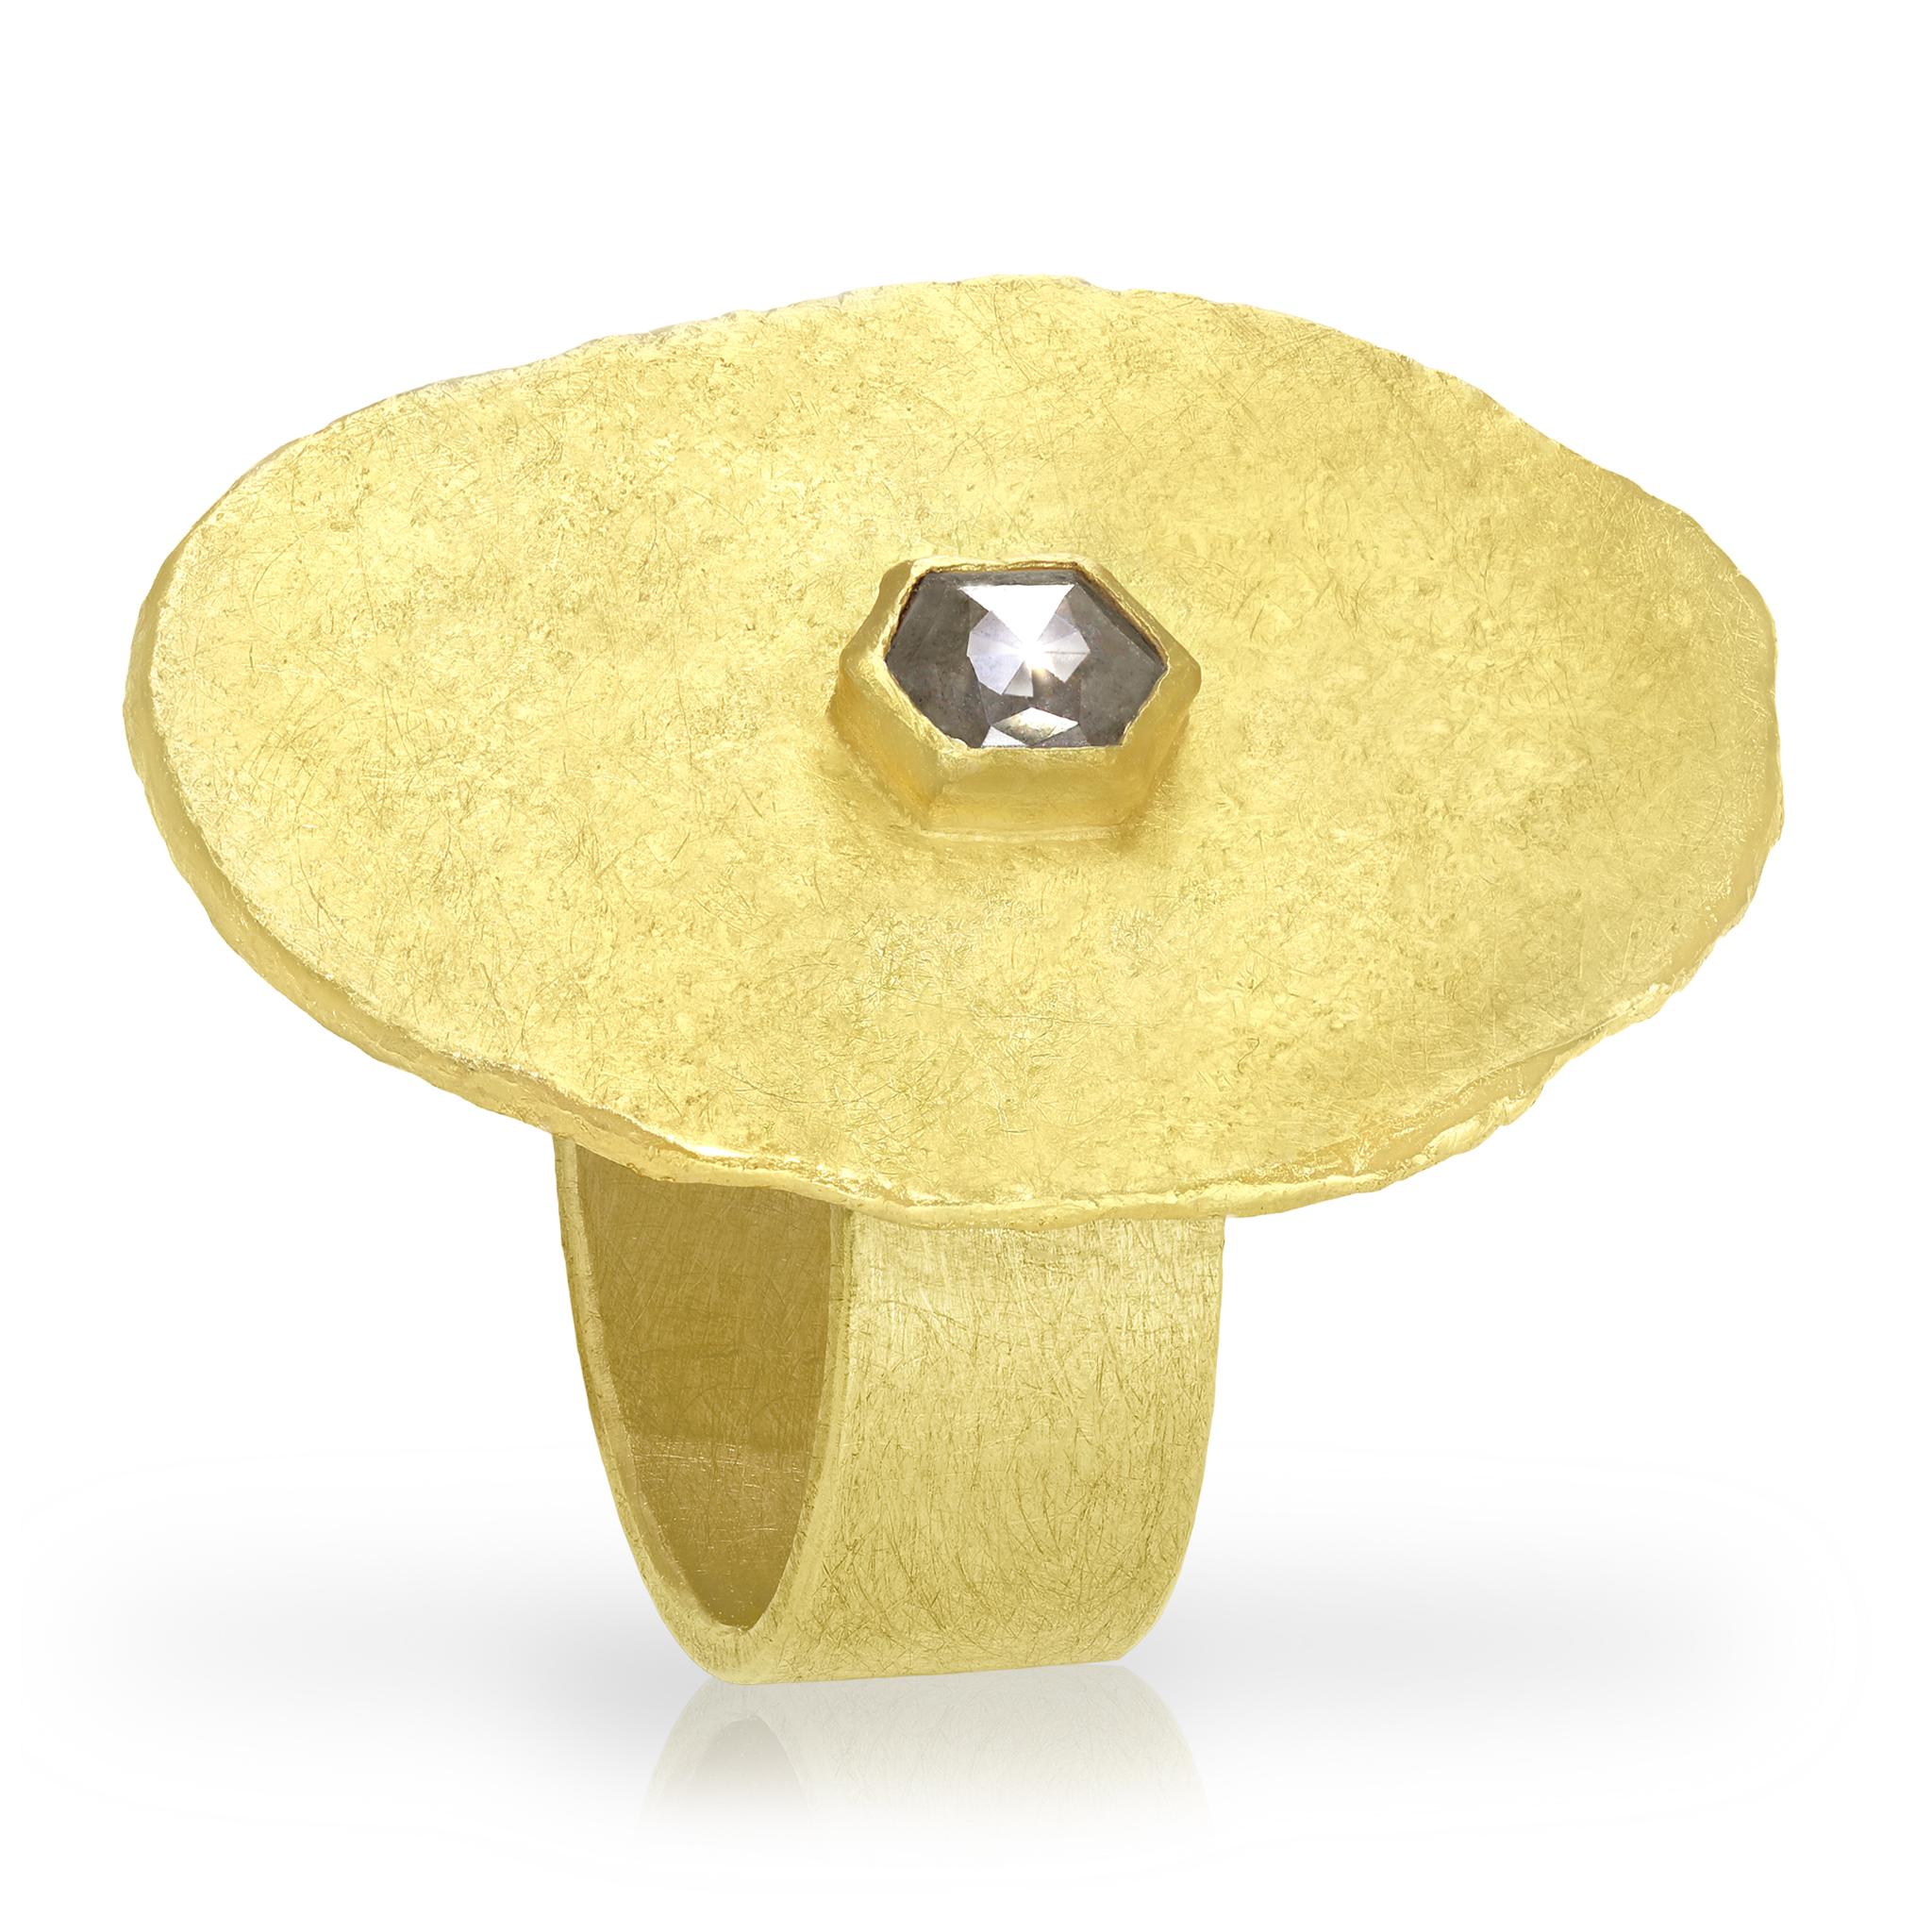 Golden Slab Ring hand-fabricated by acclaimed jewellery maker Petra Class featuring a shimmering 0.50 carat hexagonal rose-cut diamond bezel-set atop an intricately-finished 22k yellow gold slab and finished atop a 7mm wide 18k yellow gold band.